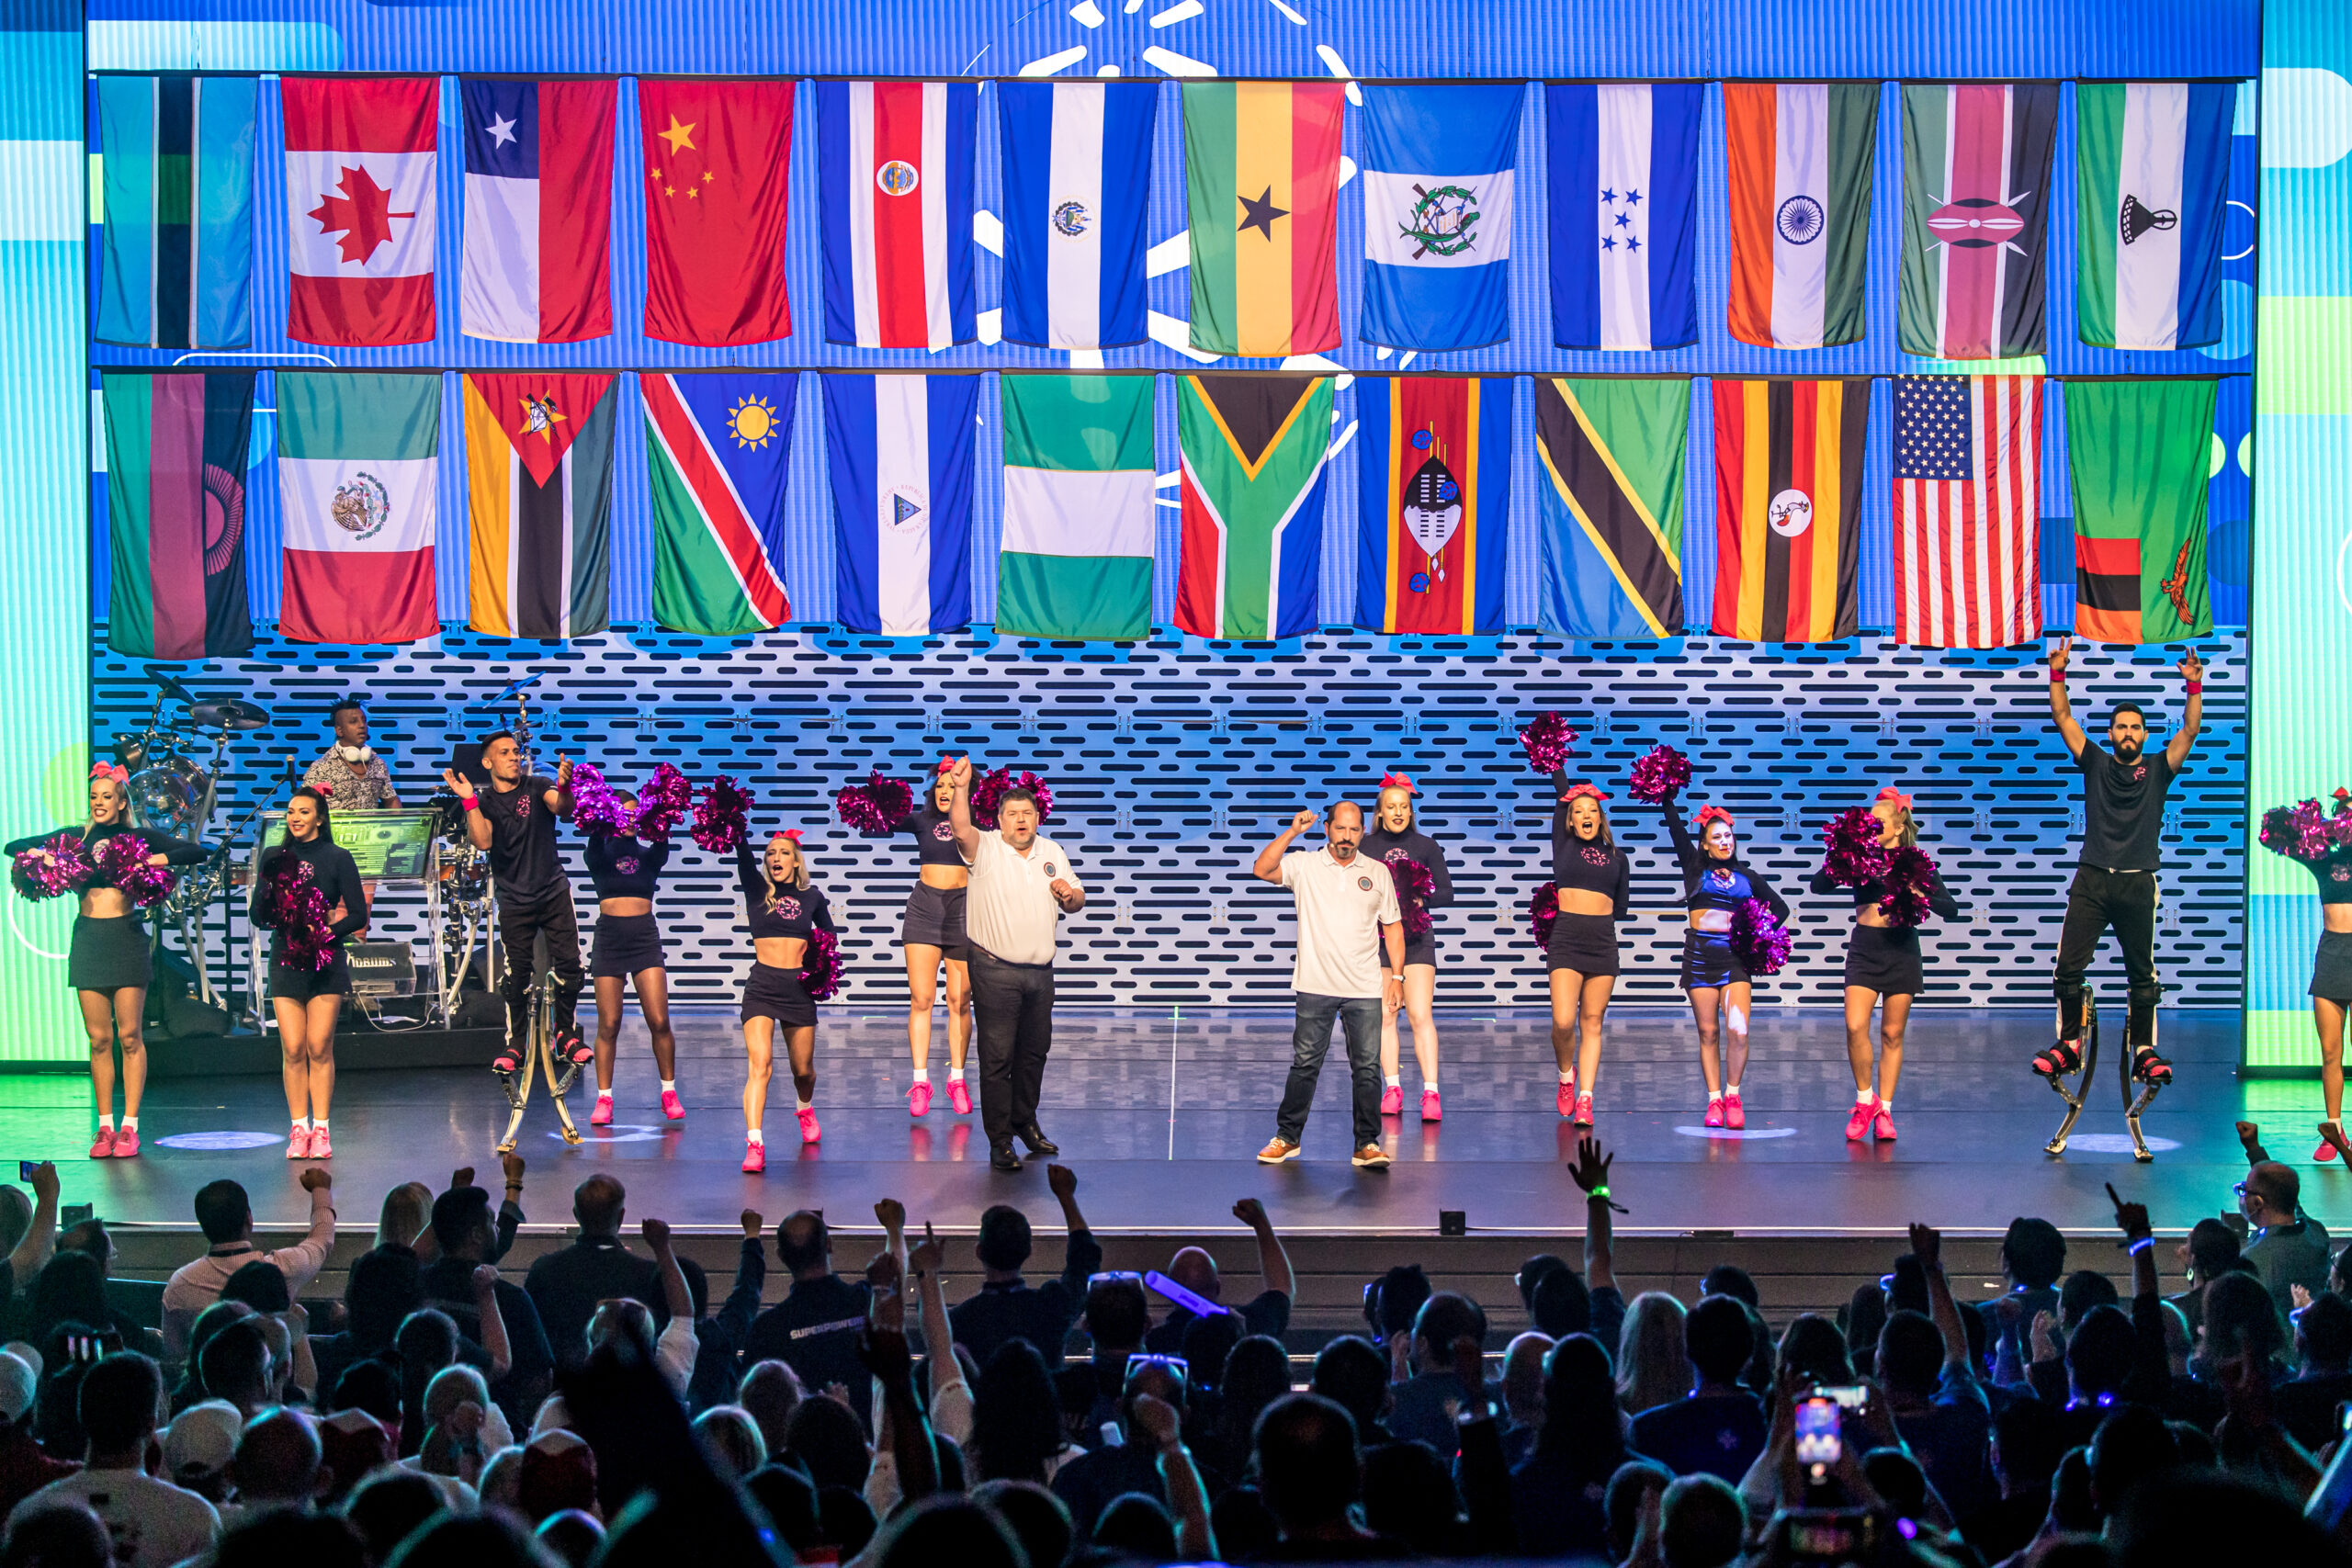 Speakers and cheerleaders stand onstage under a series of country flags for International Associates Celebration.